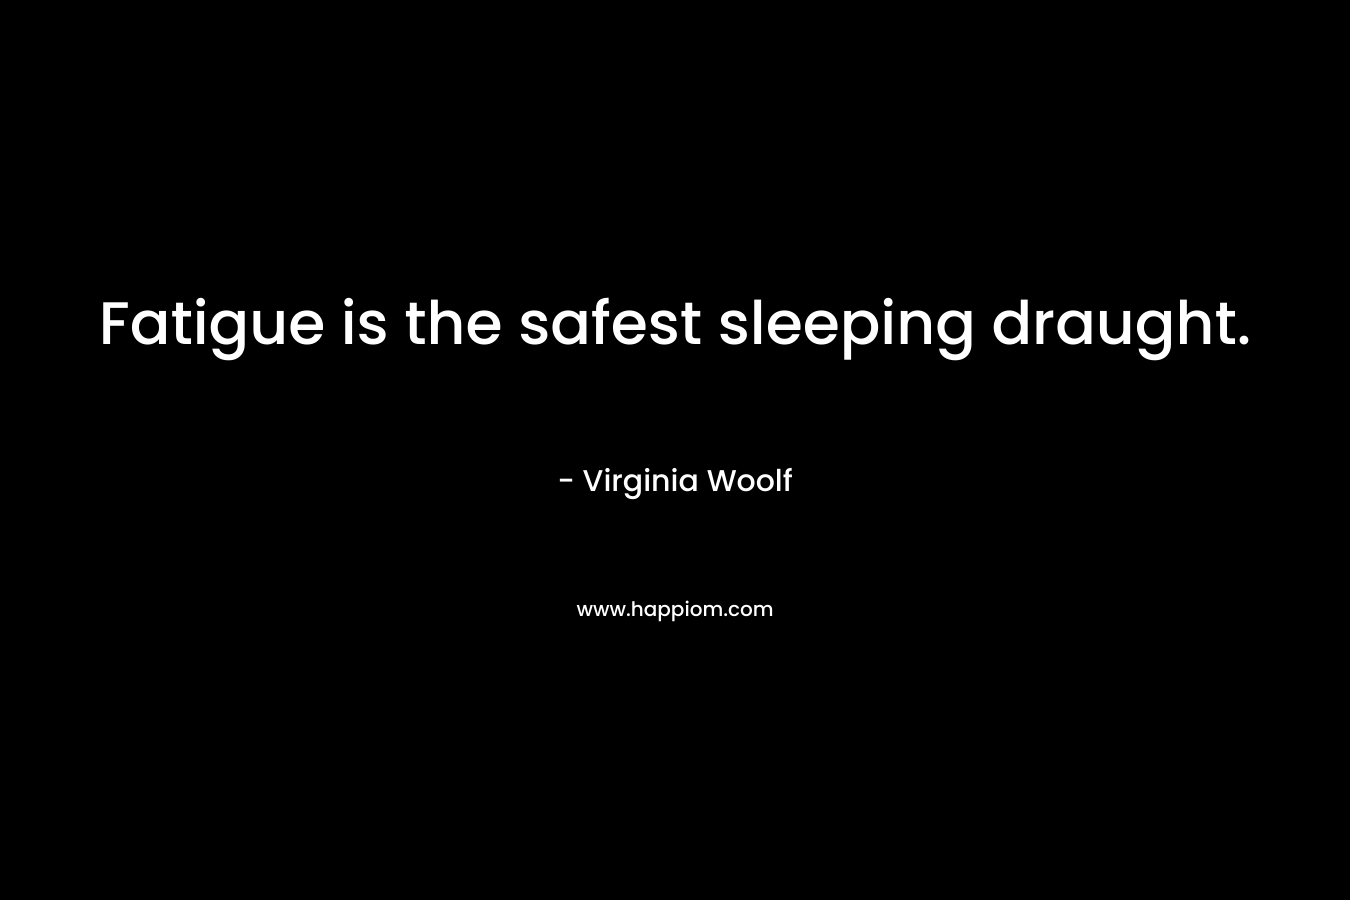 Fatigue is the safest sleeping draught.